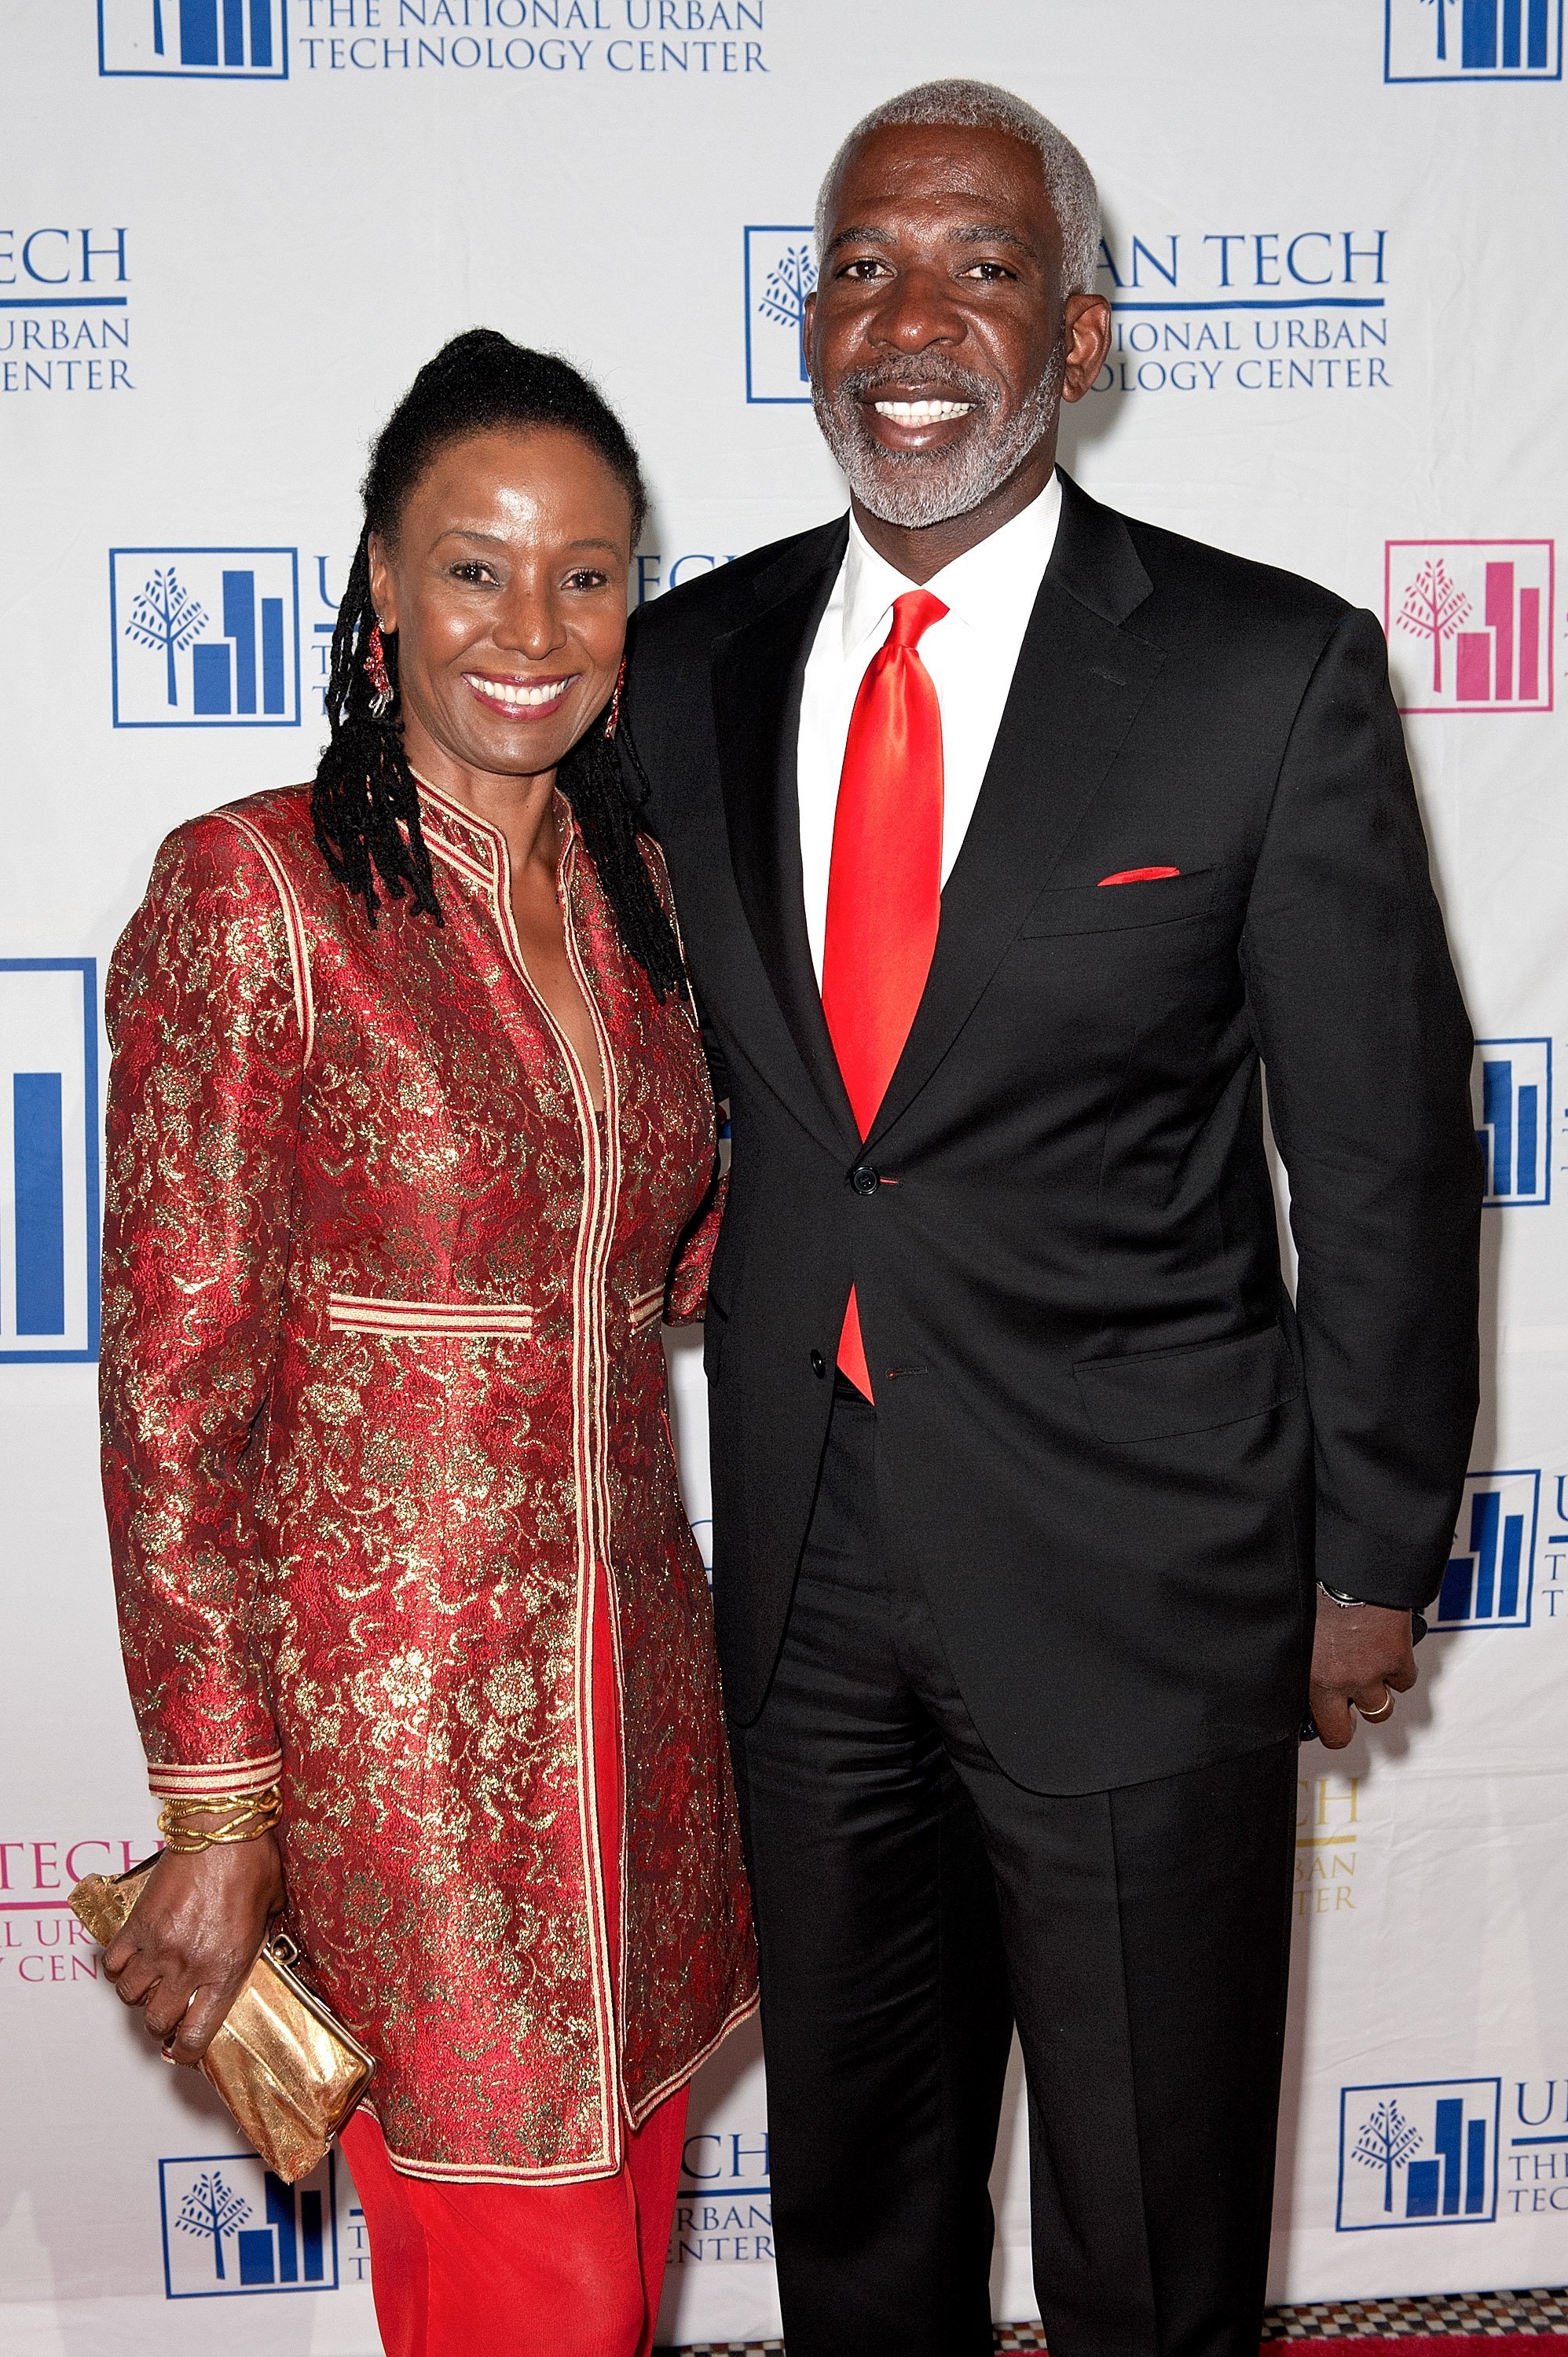 (Before the diagnosis)B. Smith & Dan Gasby at the 17th Annual National Urban Technology Center Gala in NYC on June 11, 2012. | Photo: Getty Images